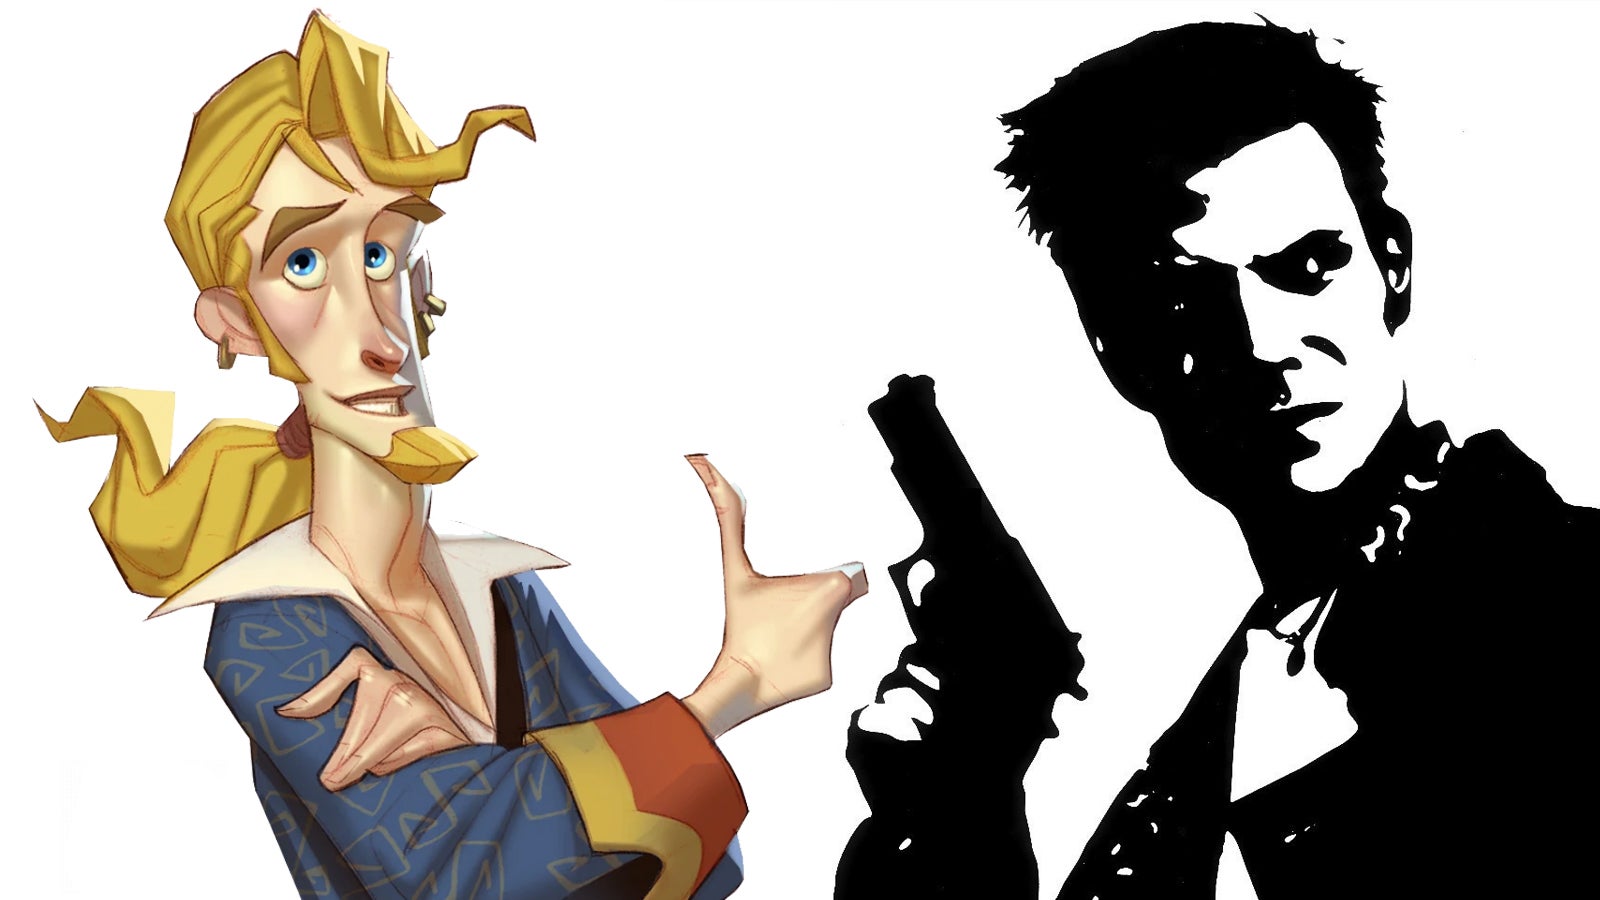 Image for Eurogamer Newscast: After Monkey Island and Max Payne, what should get revived next?